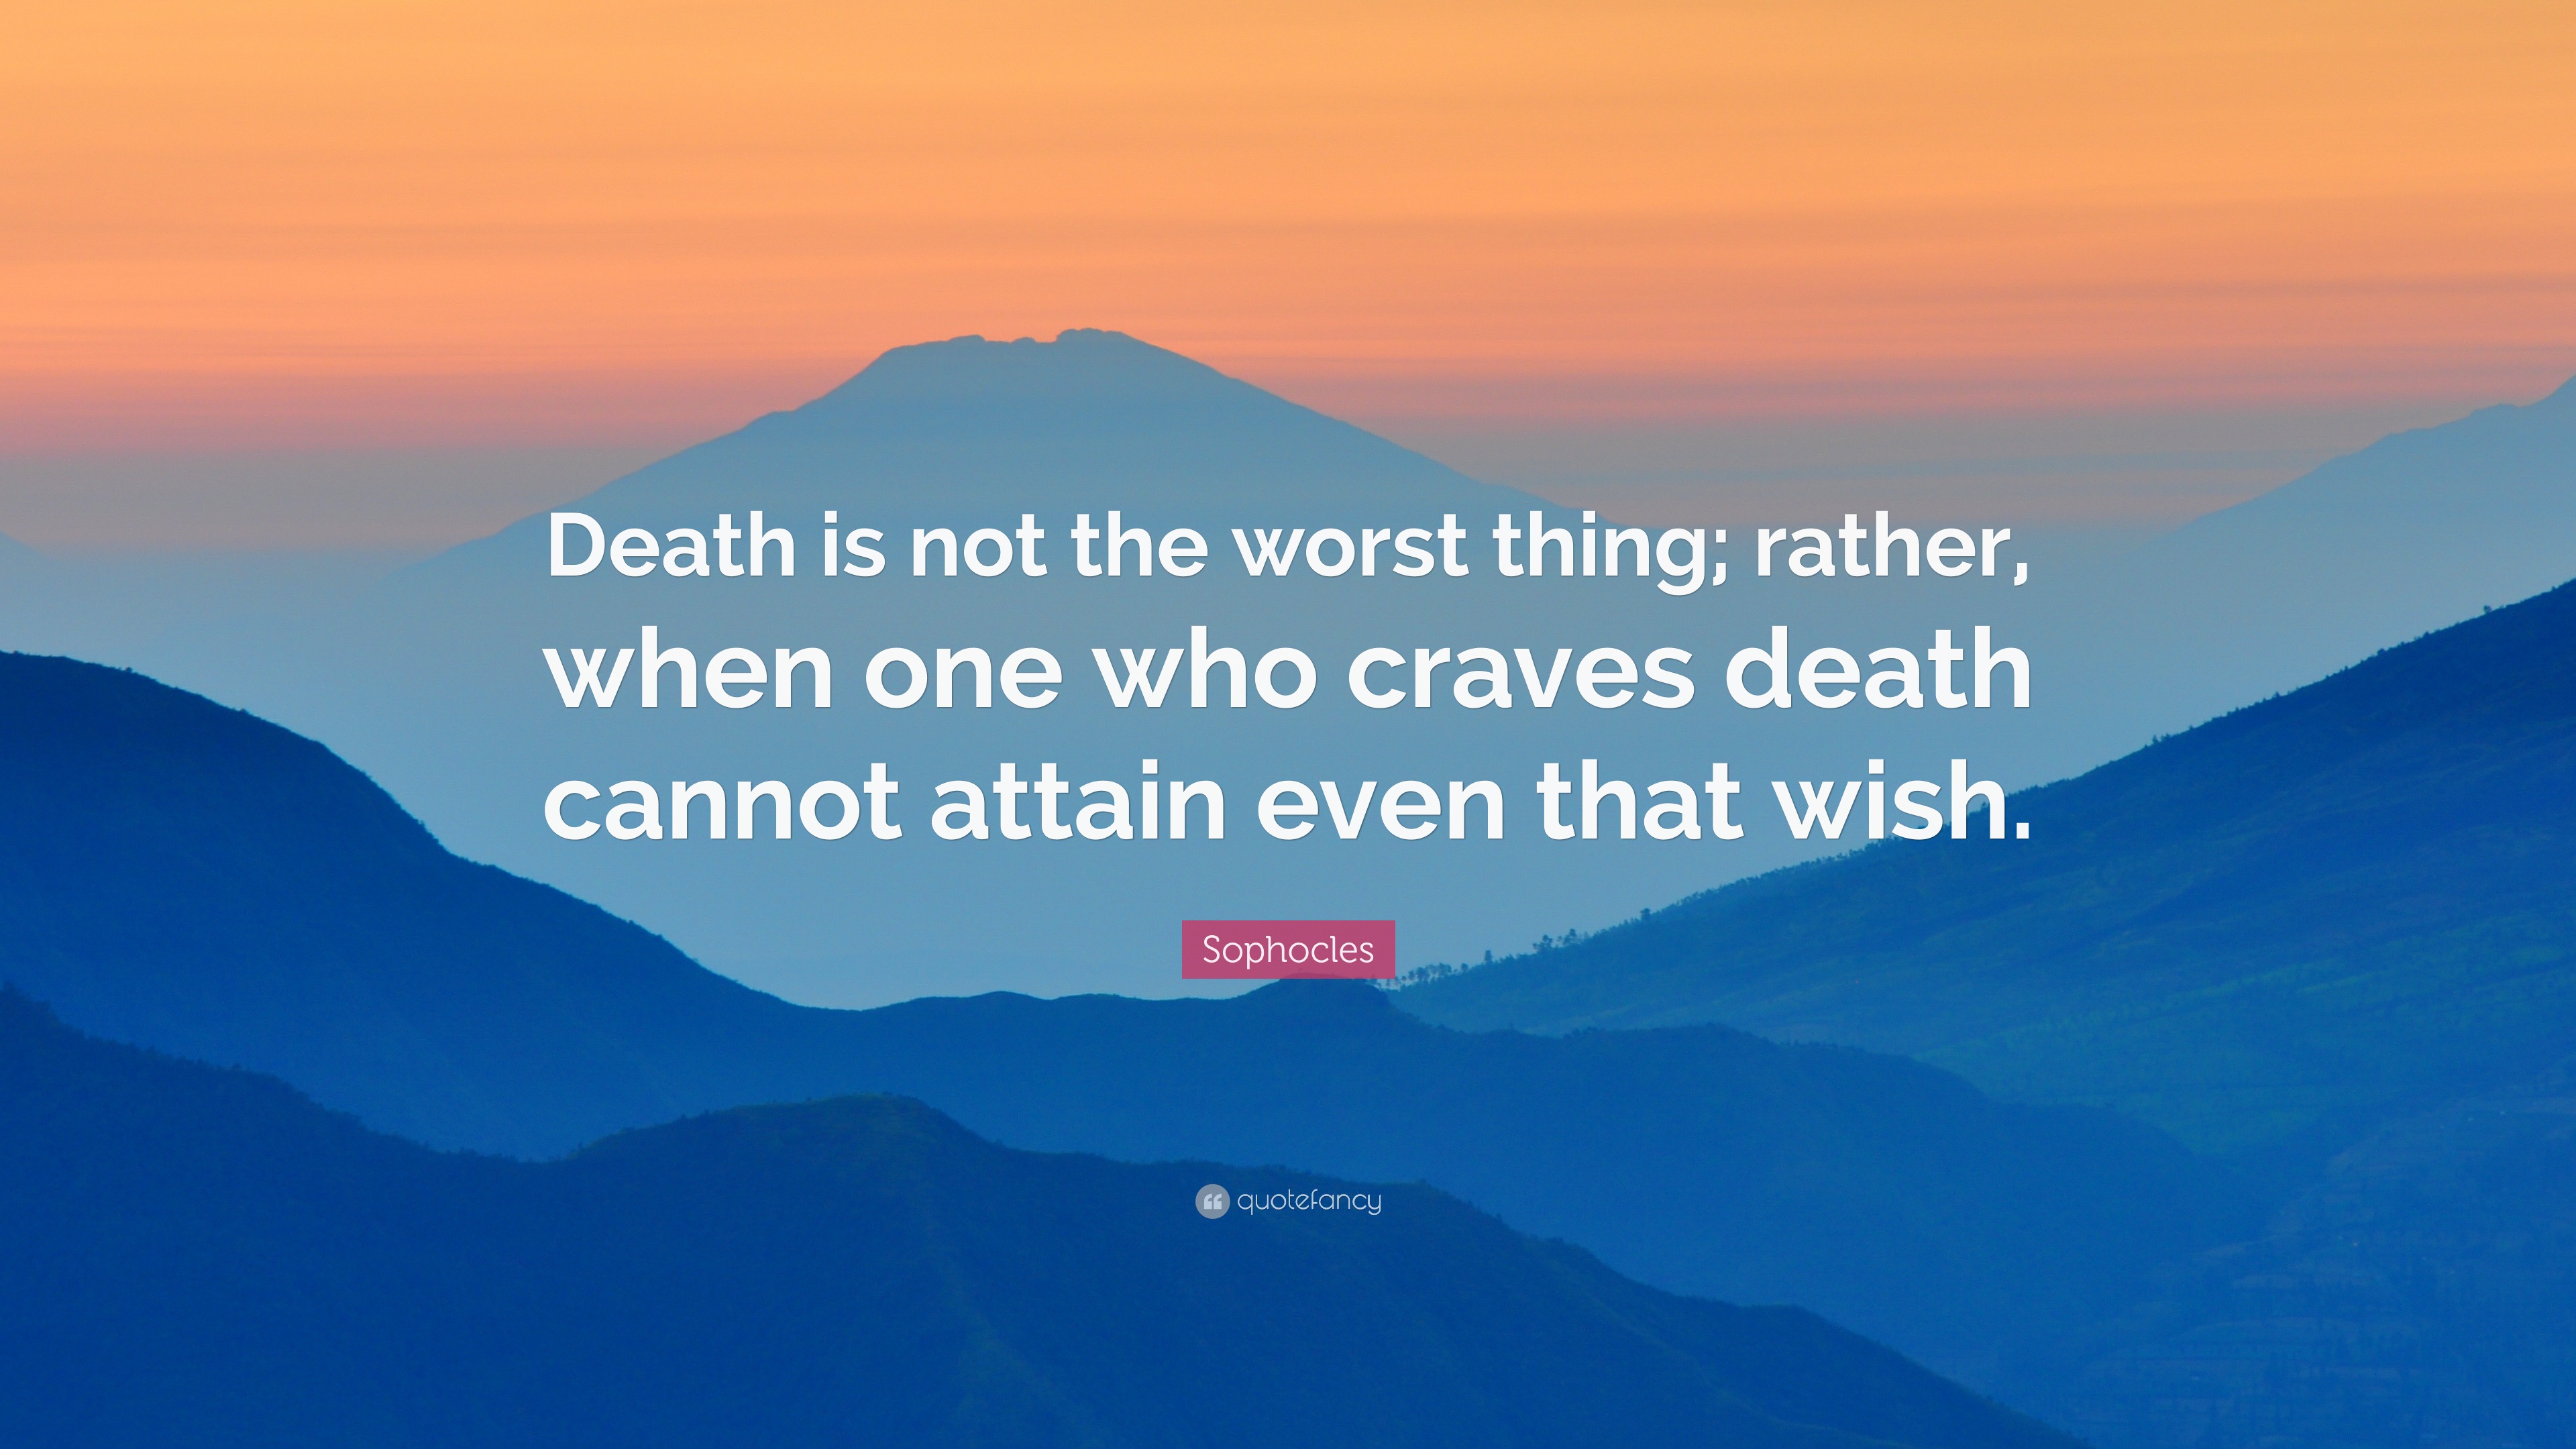 Sophocles Quote: “Death is not the worst thing; rather, when one who ...